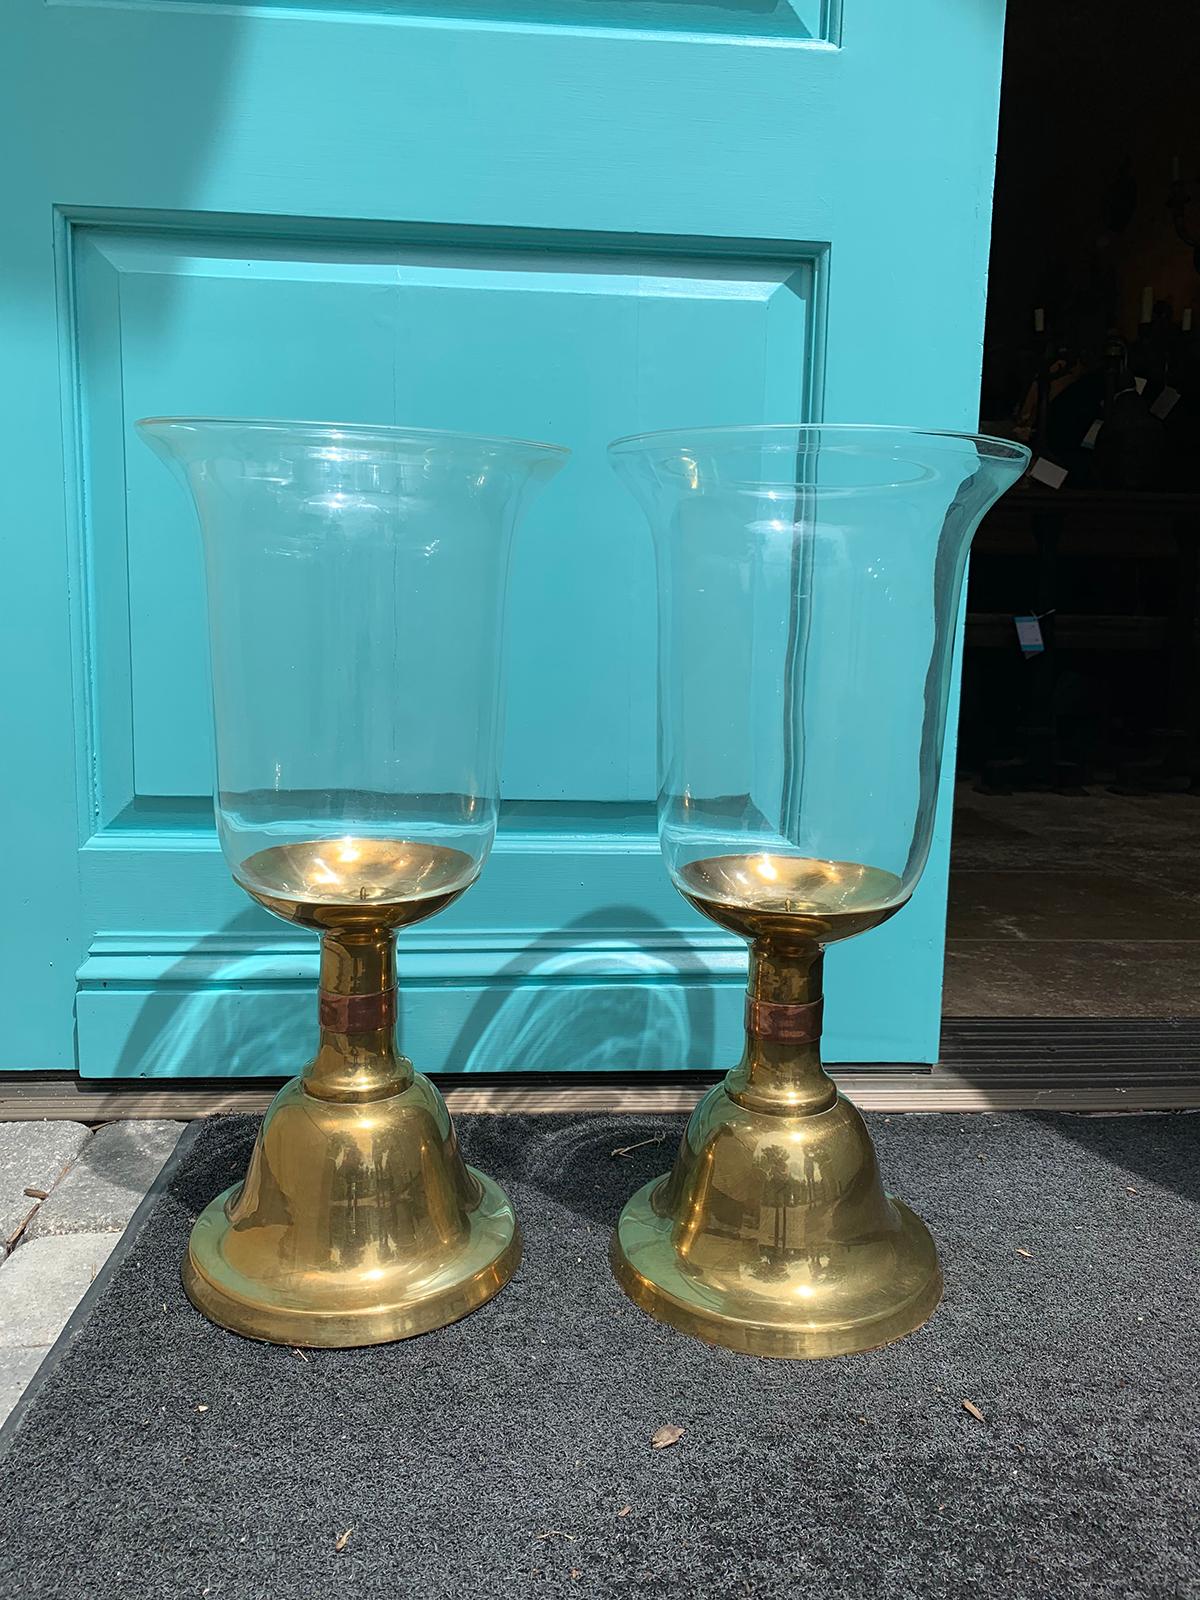 Pair of large scale Sarreid brass candlesticks with hurricane, circa 1980s
Single copper-toned banding on brass candlesticks
Glass hurricanes are clear. Turquoise shown is of our front door
Measures: 10.5